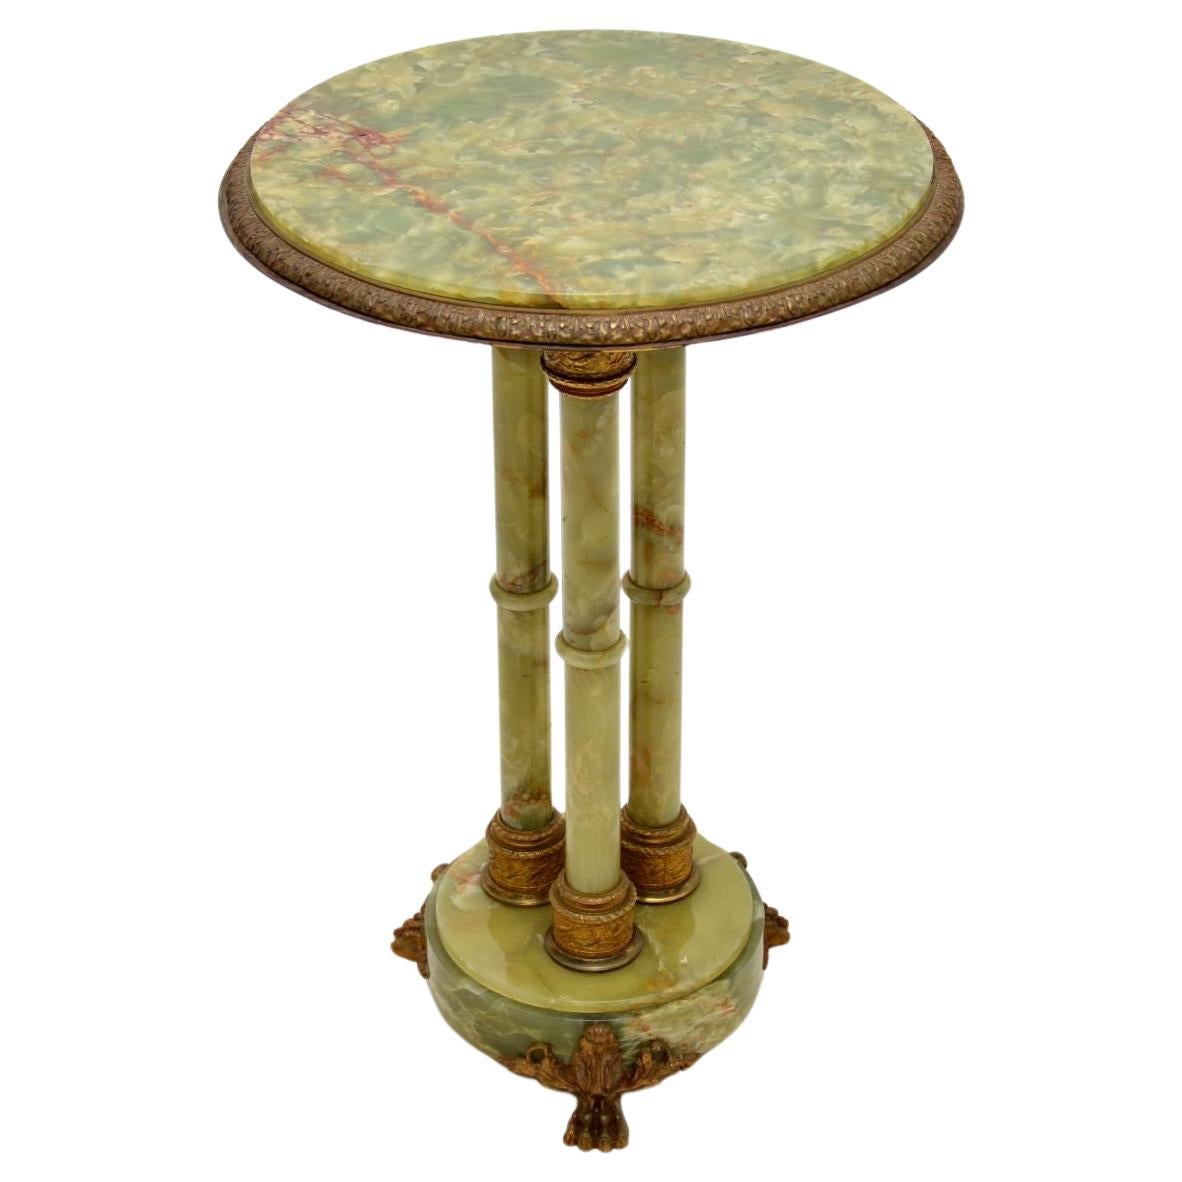 Antique French Onyx and Gilt Metal Occasional Side Table